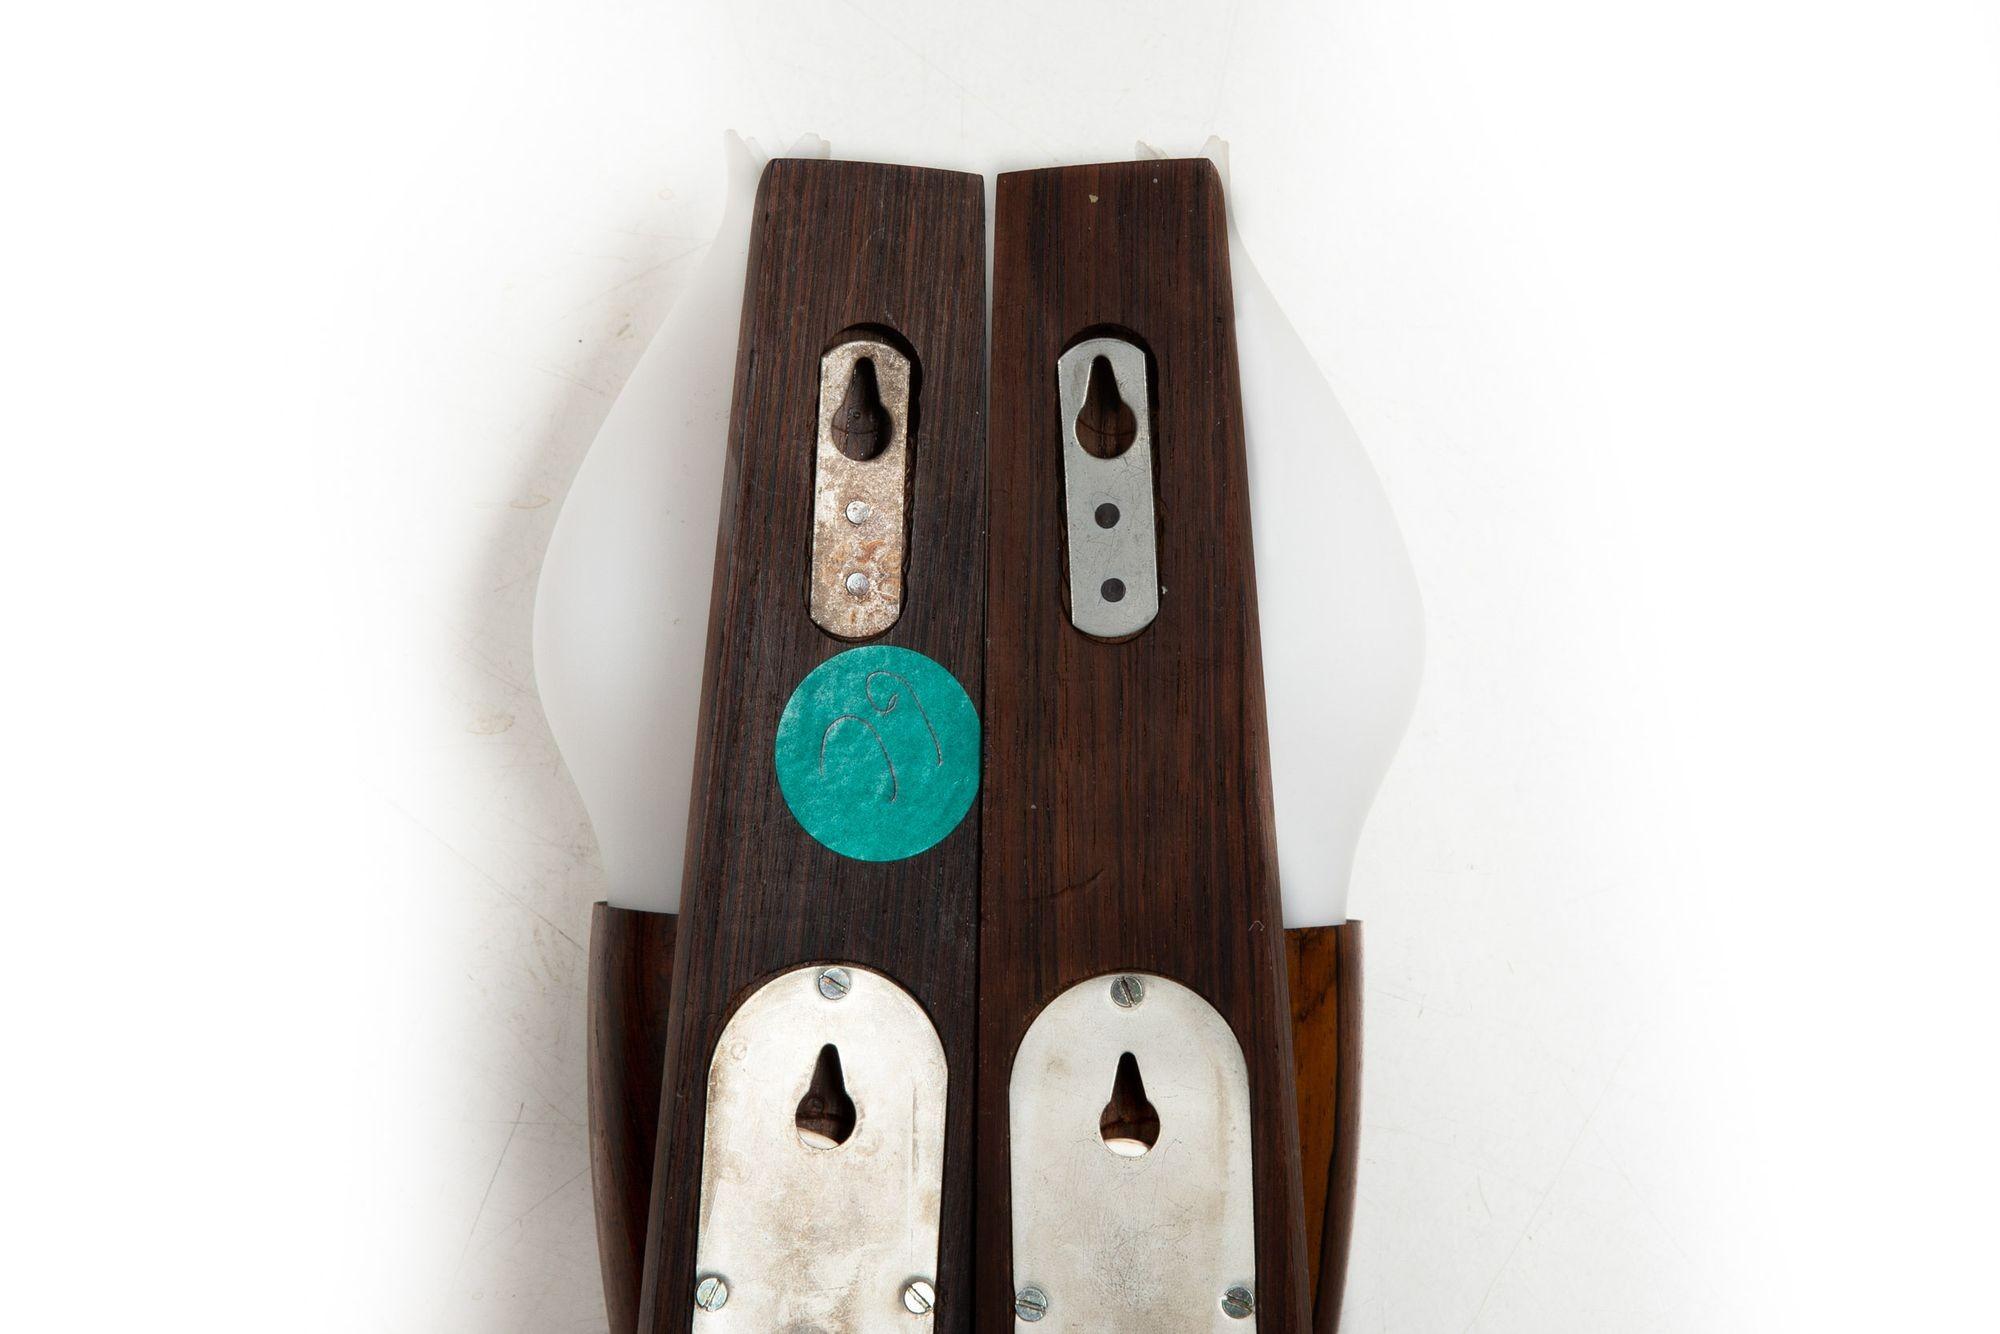 Pair of Danish Modern Rosewood Wall Sconces by Vitrika circa 1970s For Sale 2